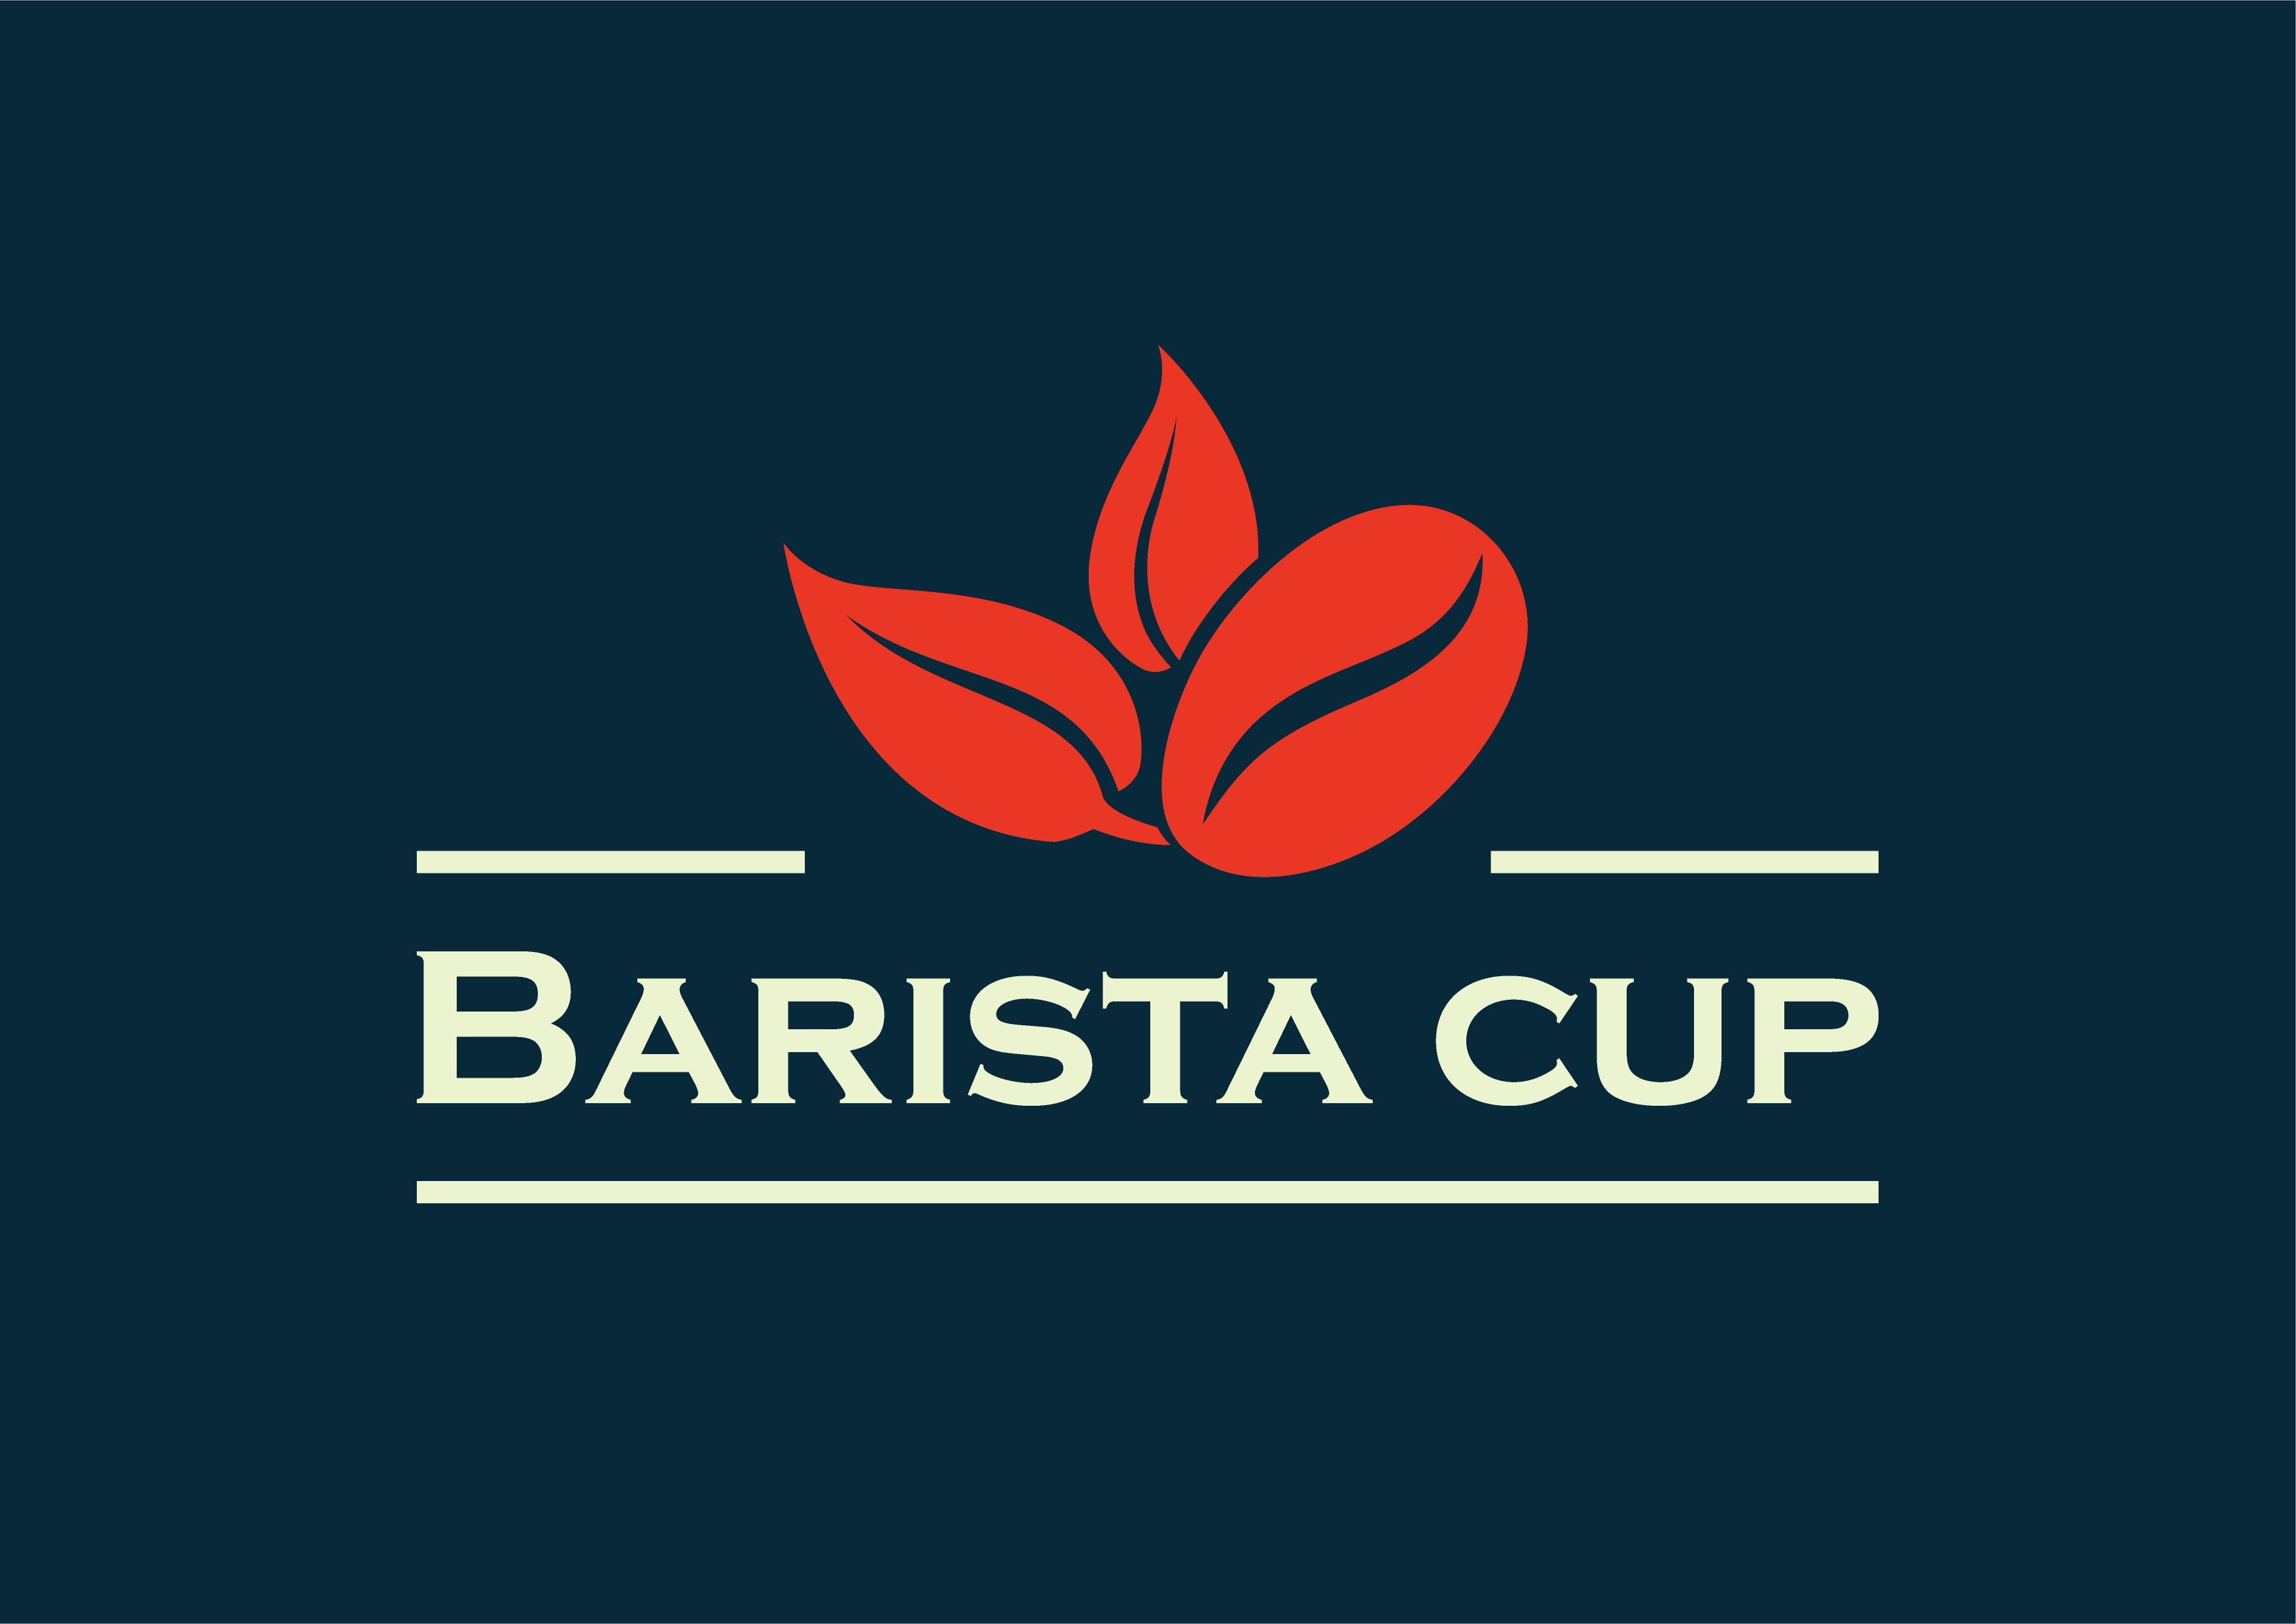 The Barista Cup